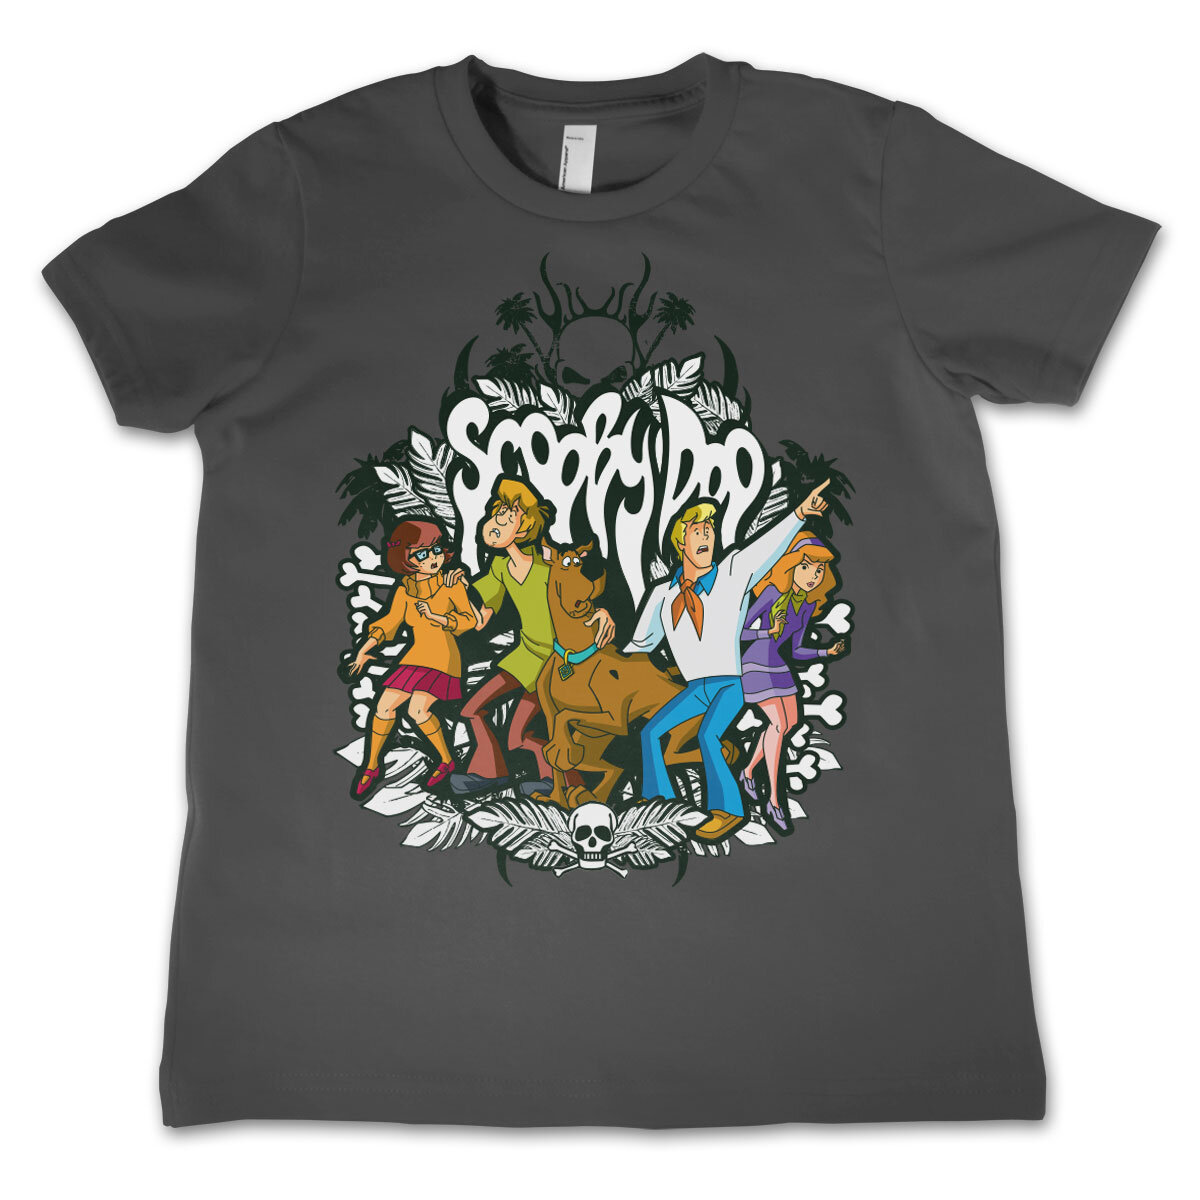 Scared Scooby Doo Kids T-Shirt